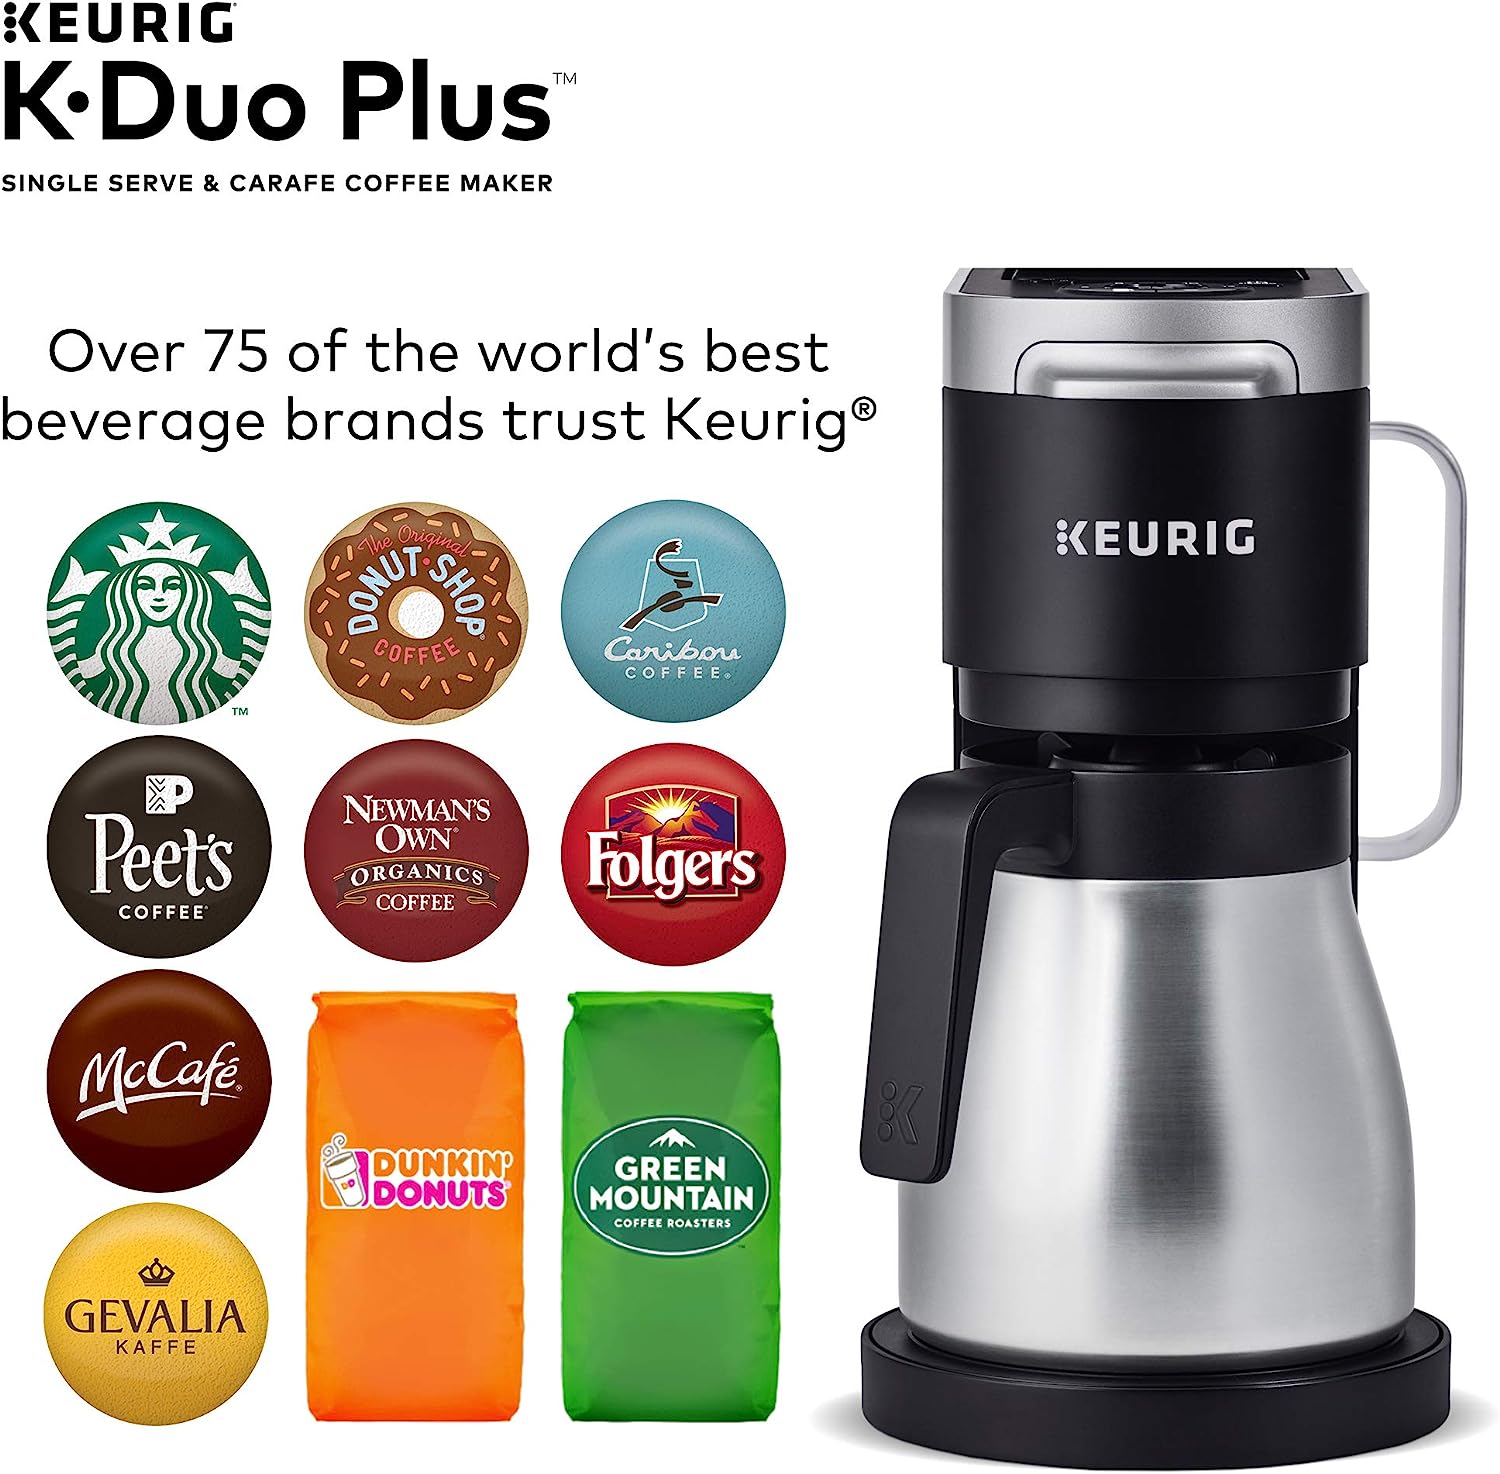 Keurig K Duo Plus Coffee Maker With Single Serve And Carafe for